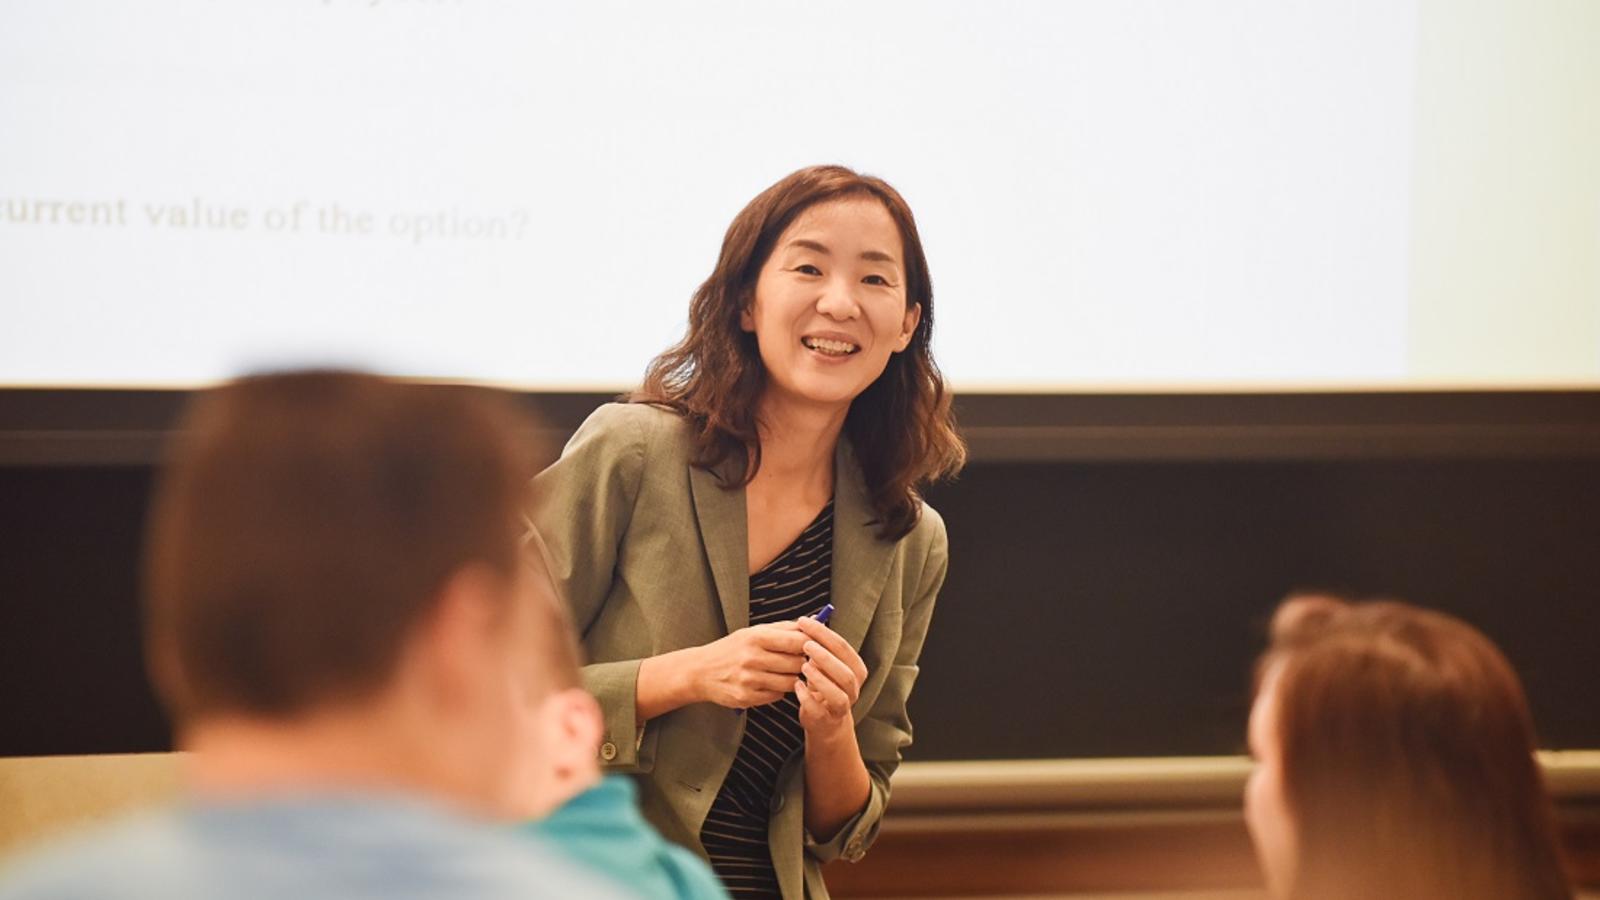 Meet the Teach | Inspiring, World-Renowned Faculty | Rice Business